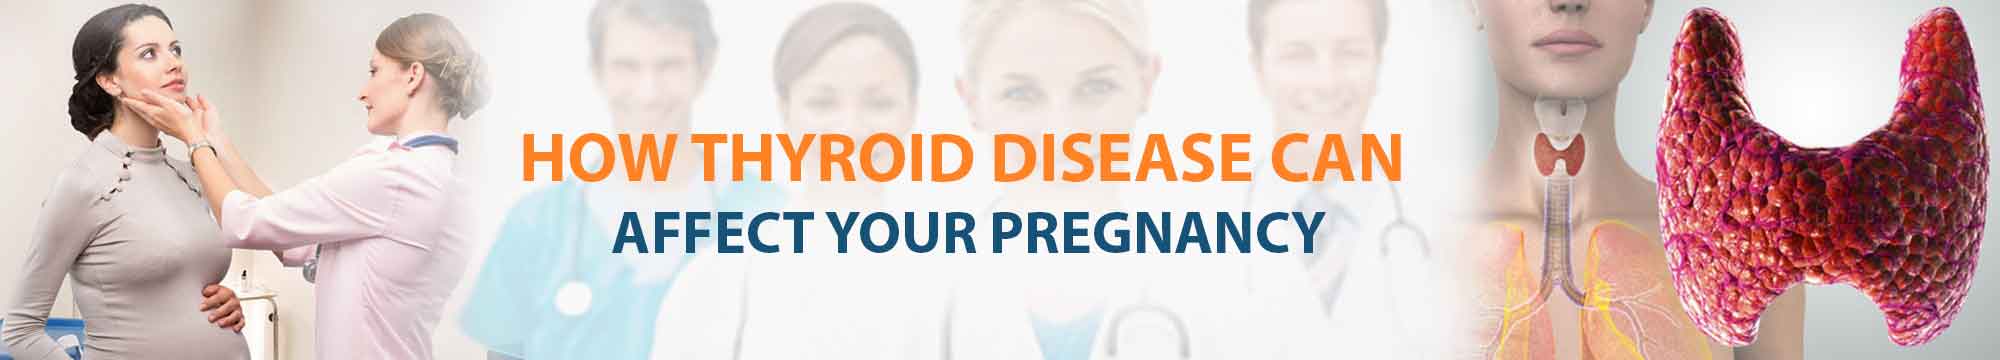 How thyroid disease can affect your pregnancy